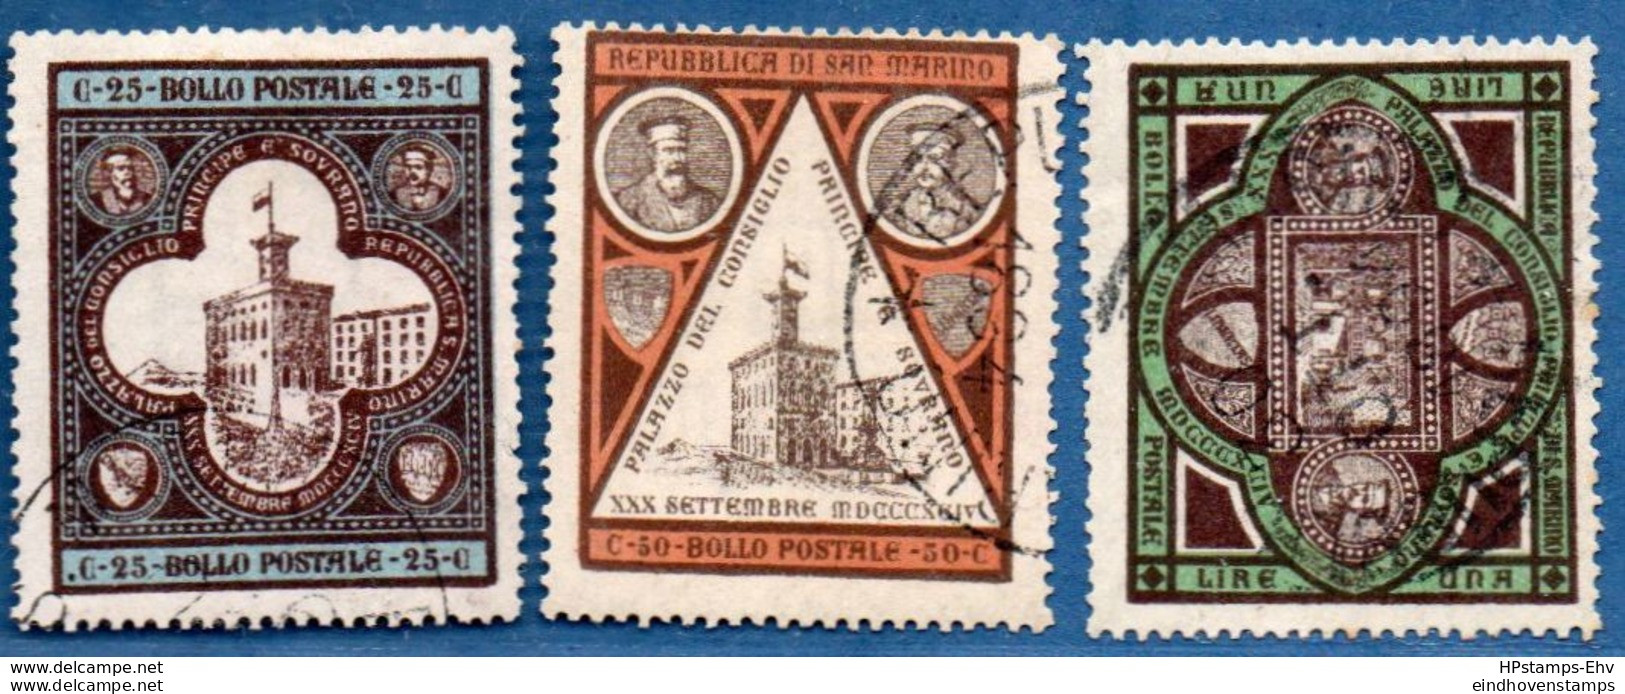 San Marino 1894 Inauguration Government Building Set 3 Values Cancelled - 2005.2619 Dull Printing - Used Stamps